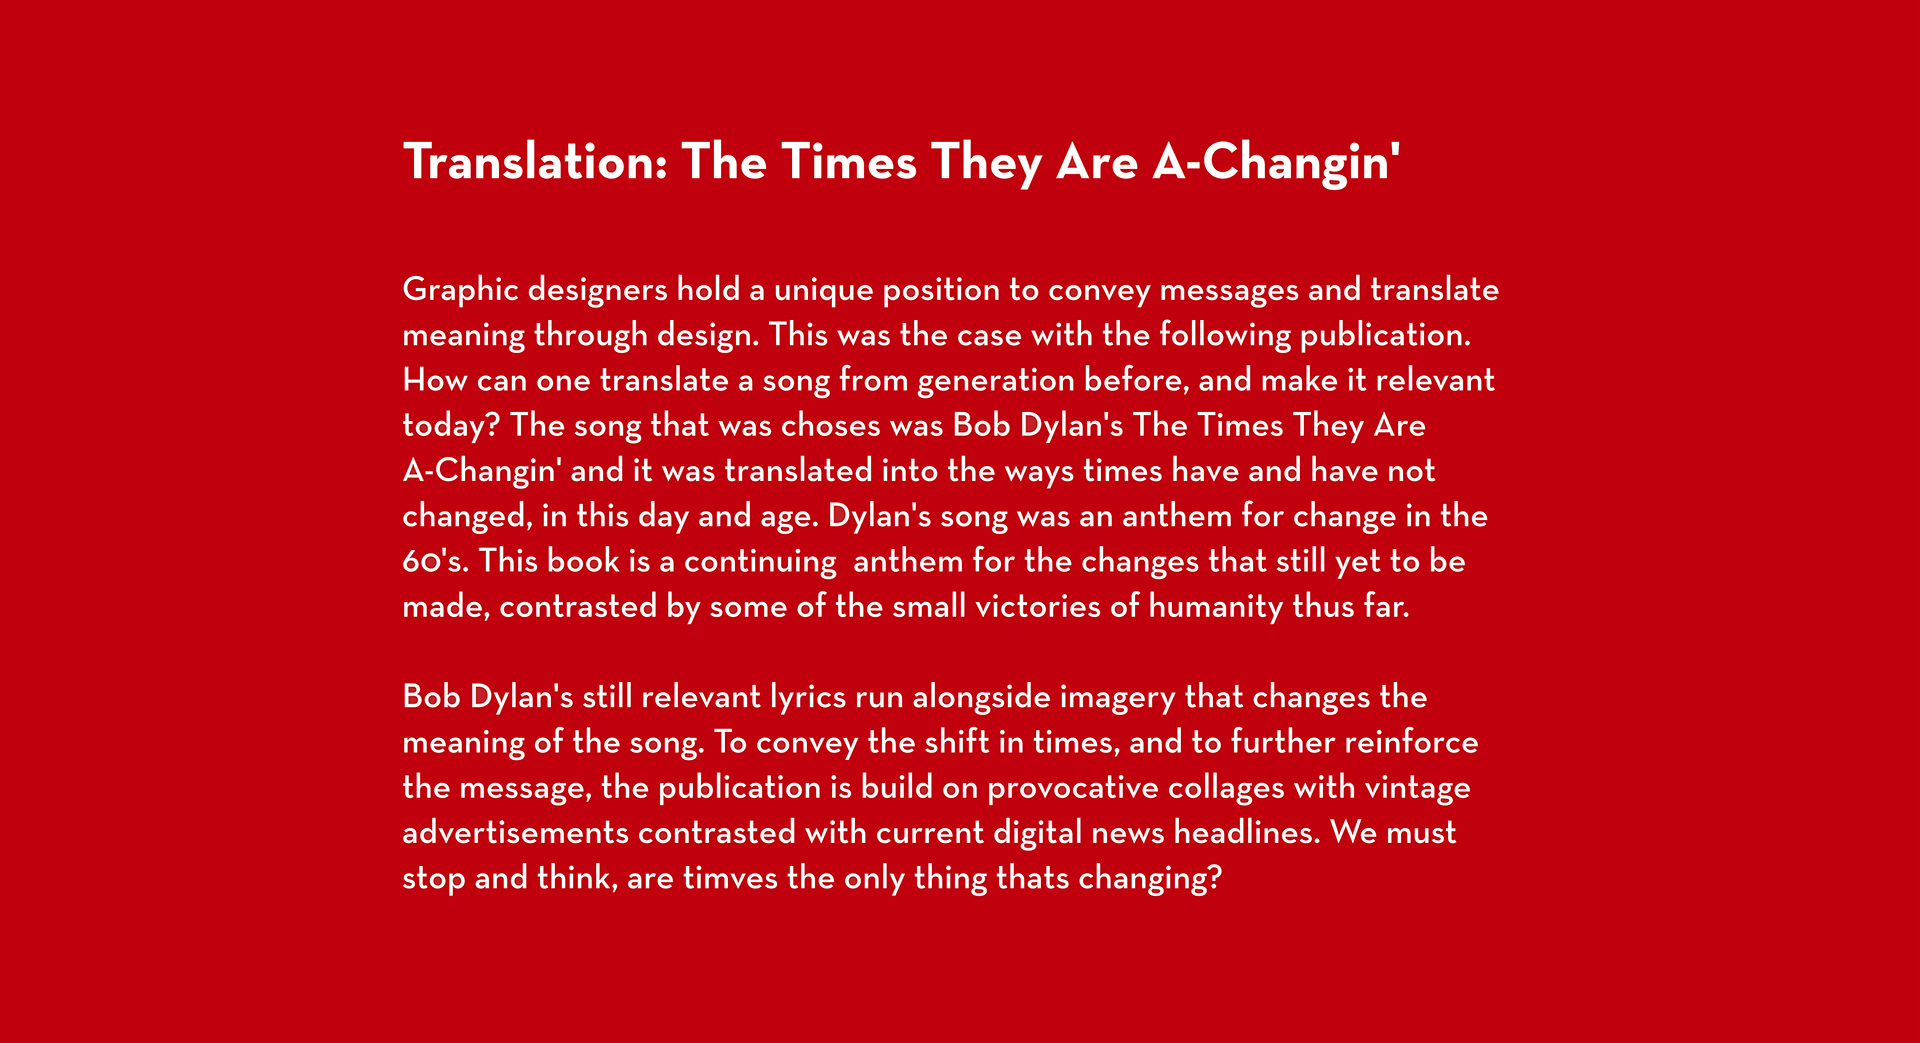 the times they are a changin essay